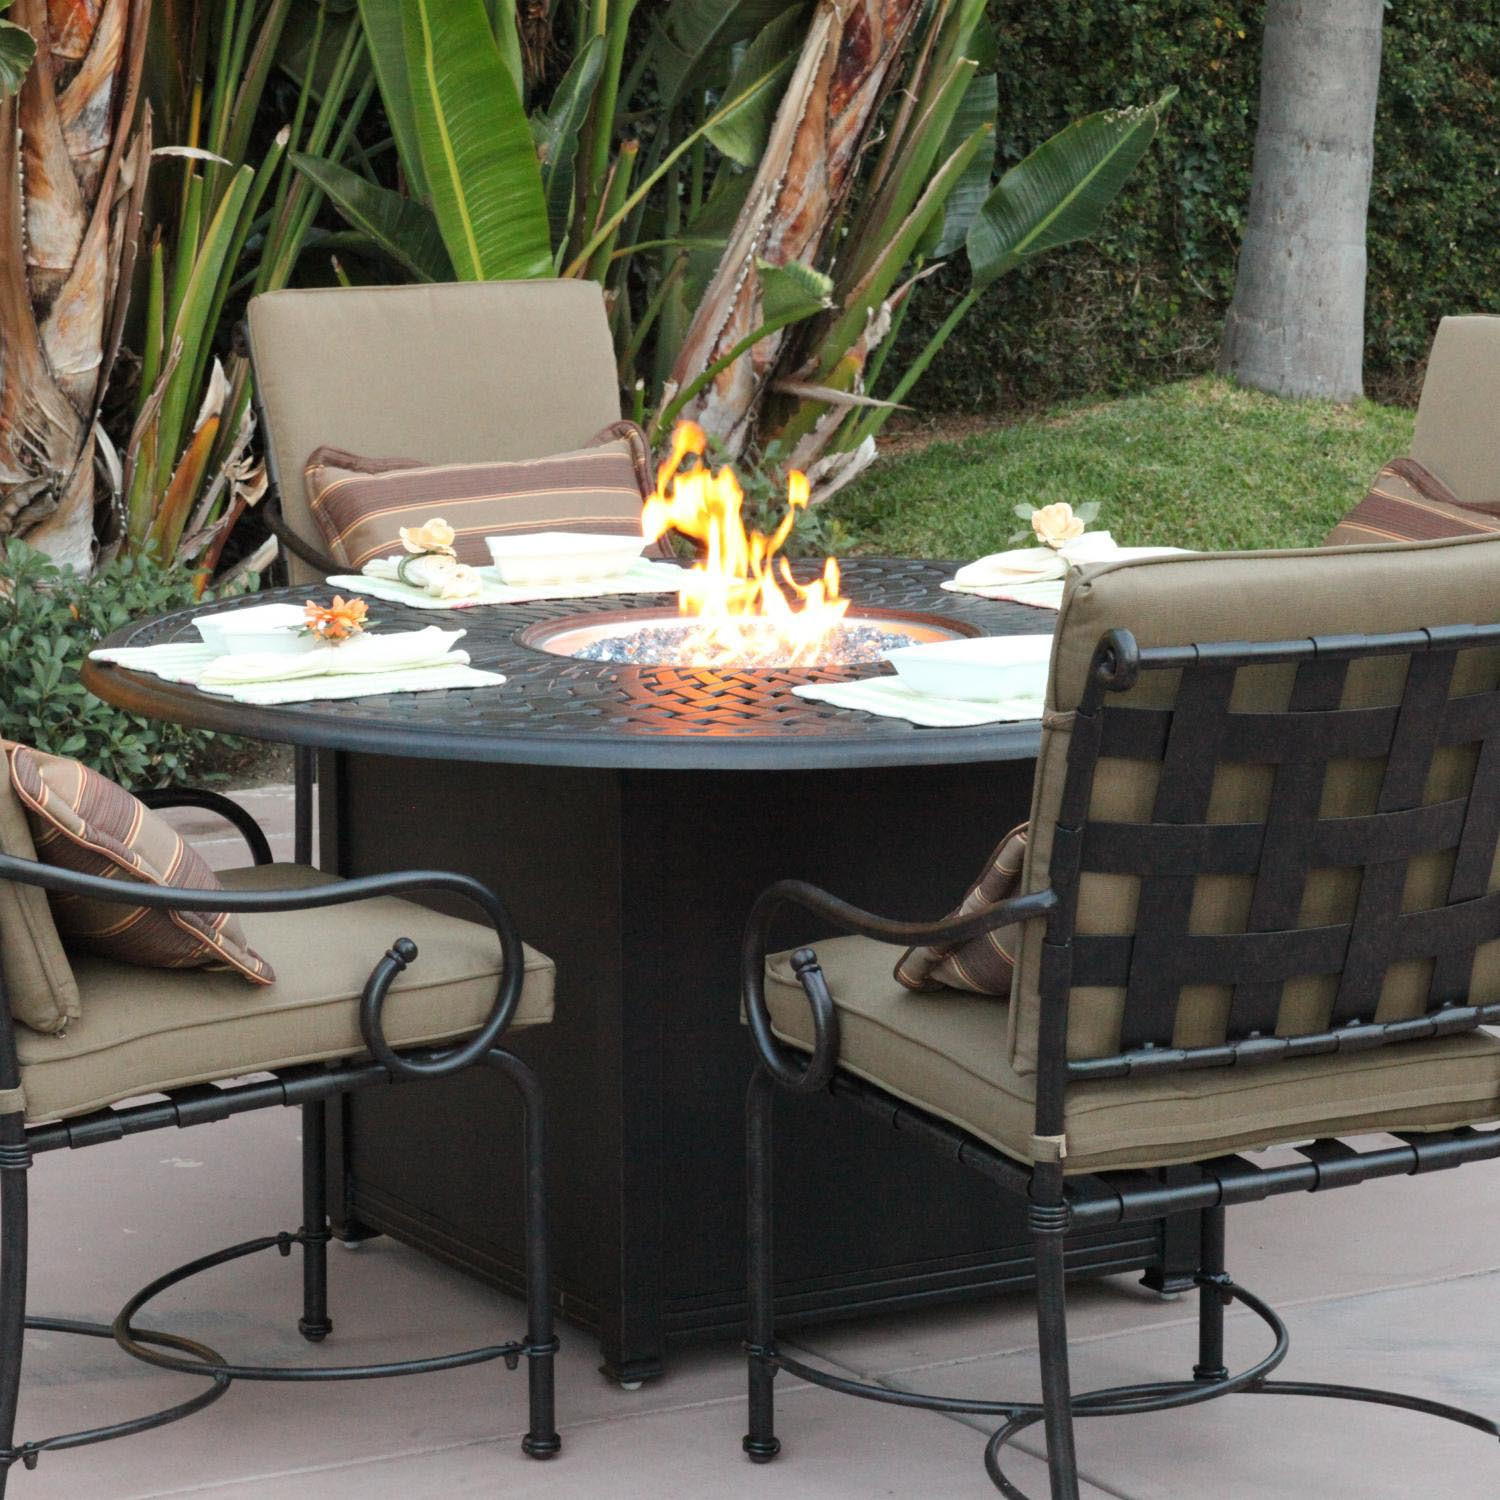 Patio Tables With Fire Pits
 Patio Dining Table With Fire Pit